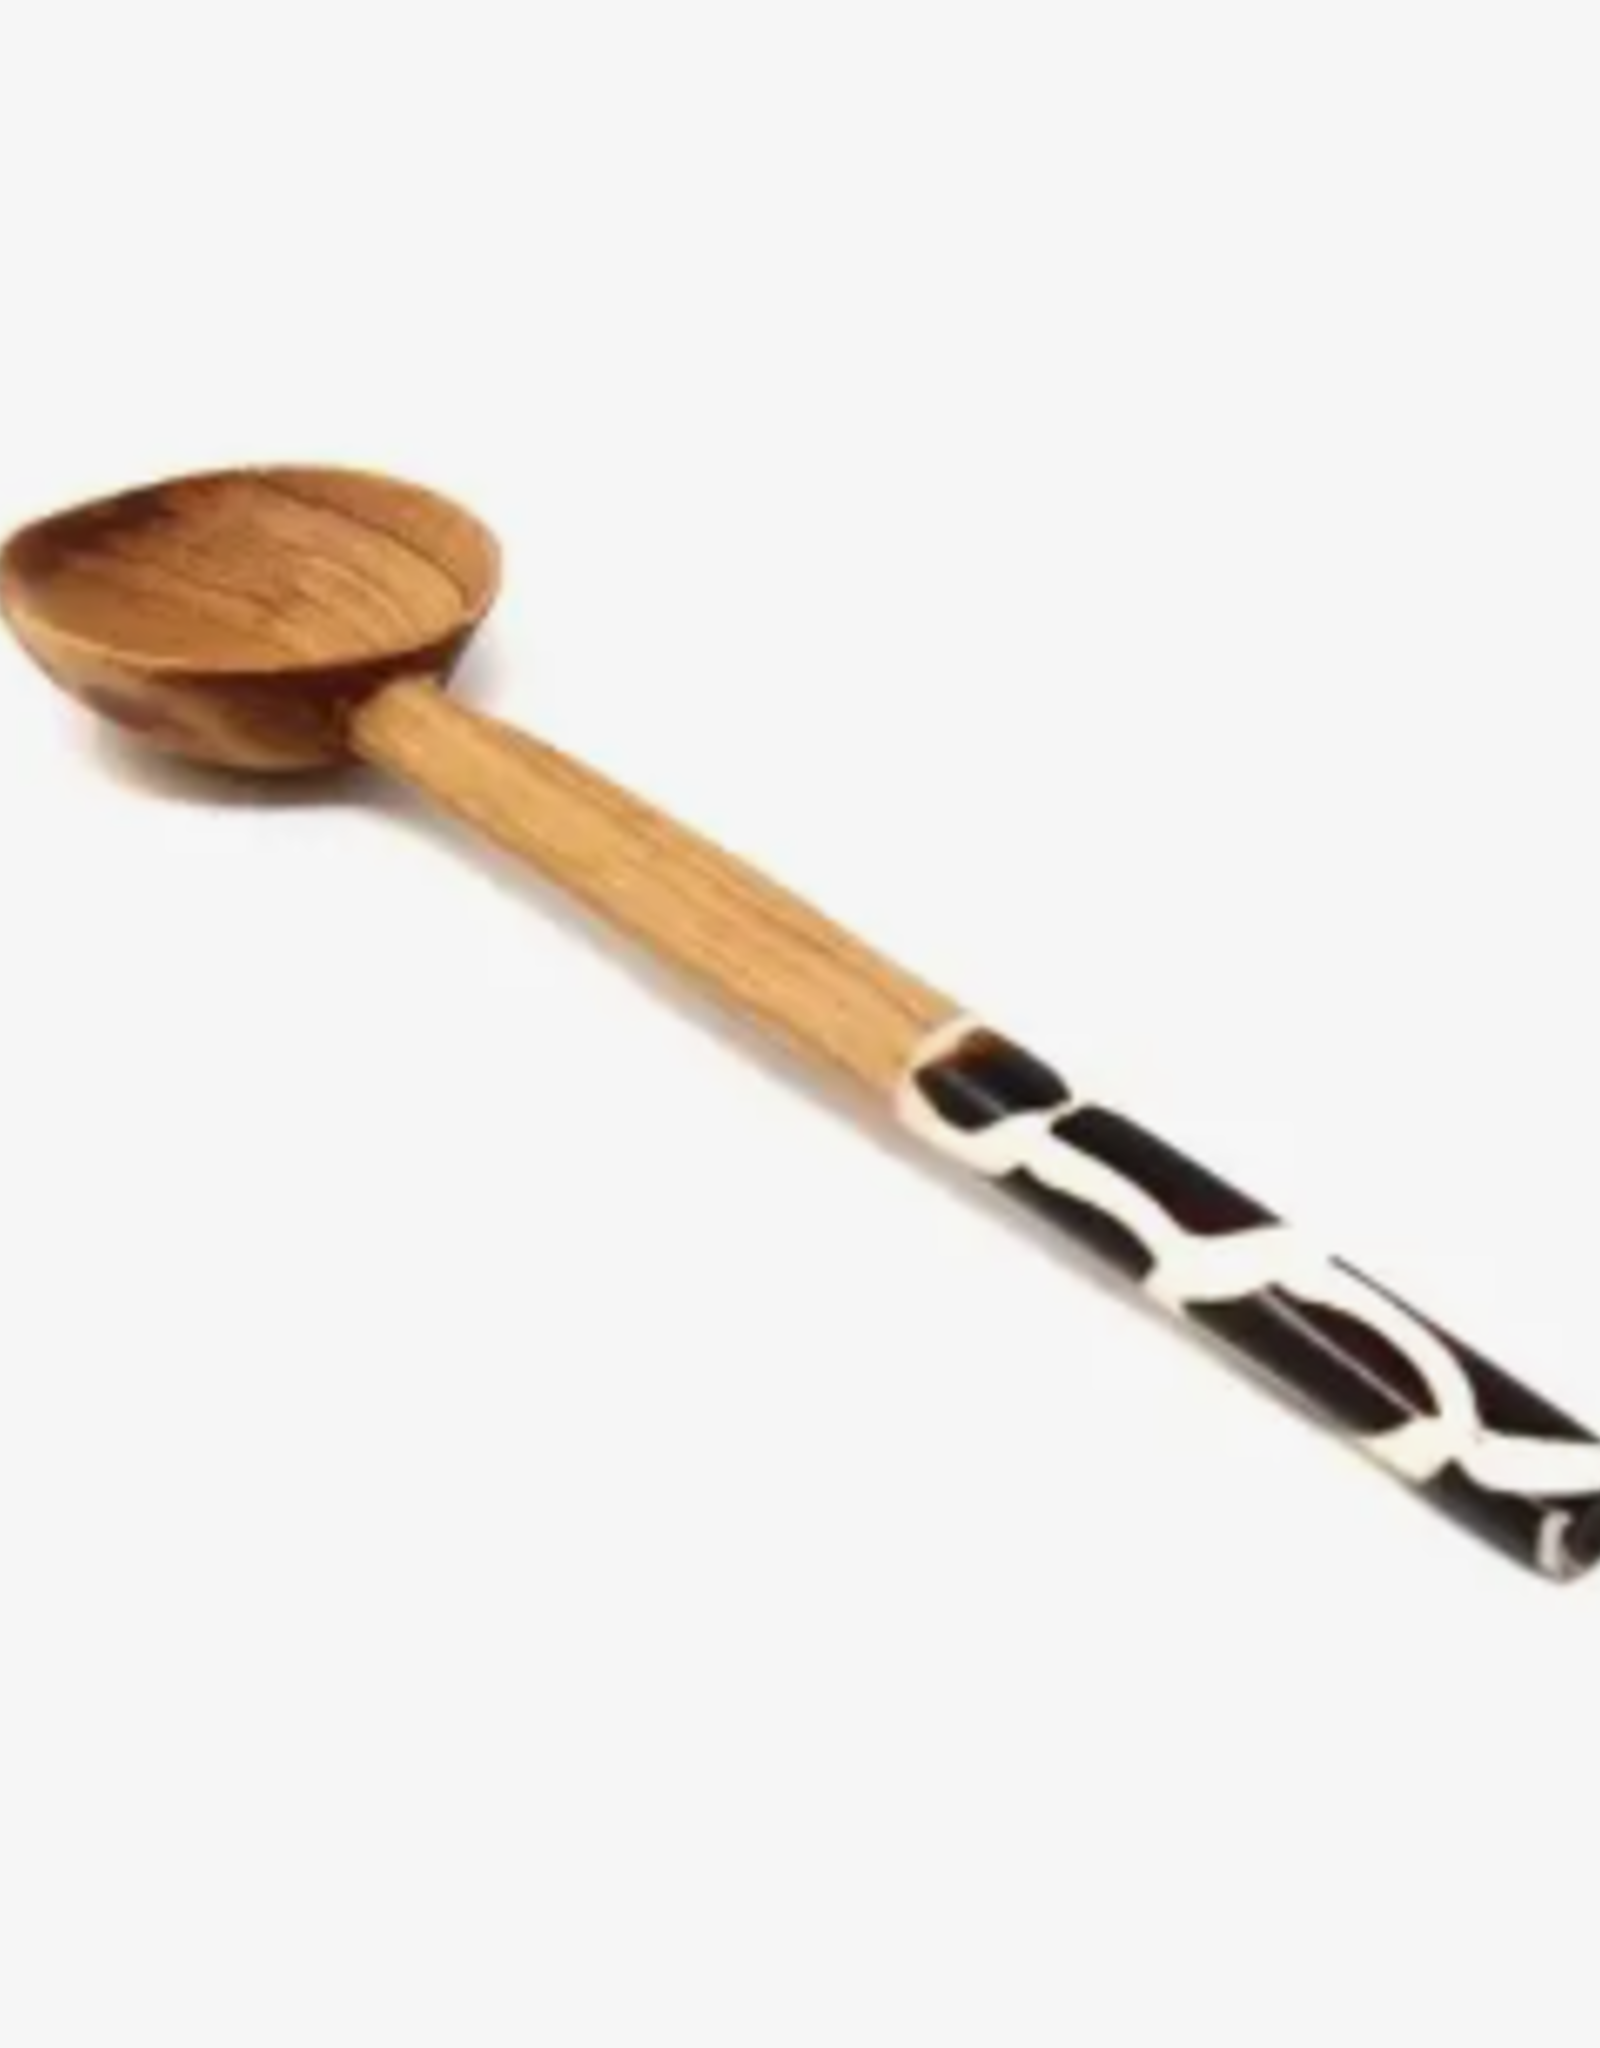 Global Crafts Olive Wood Appetizer Spoon with Bone Handle